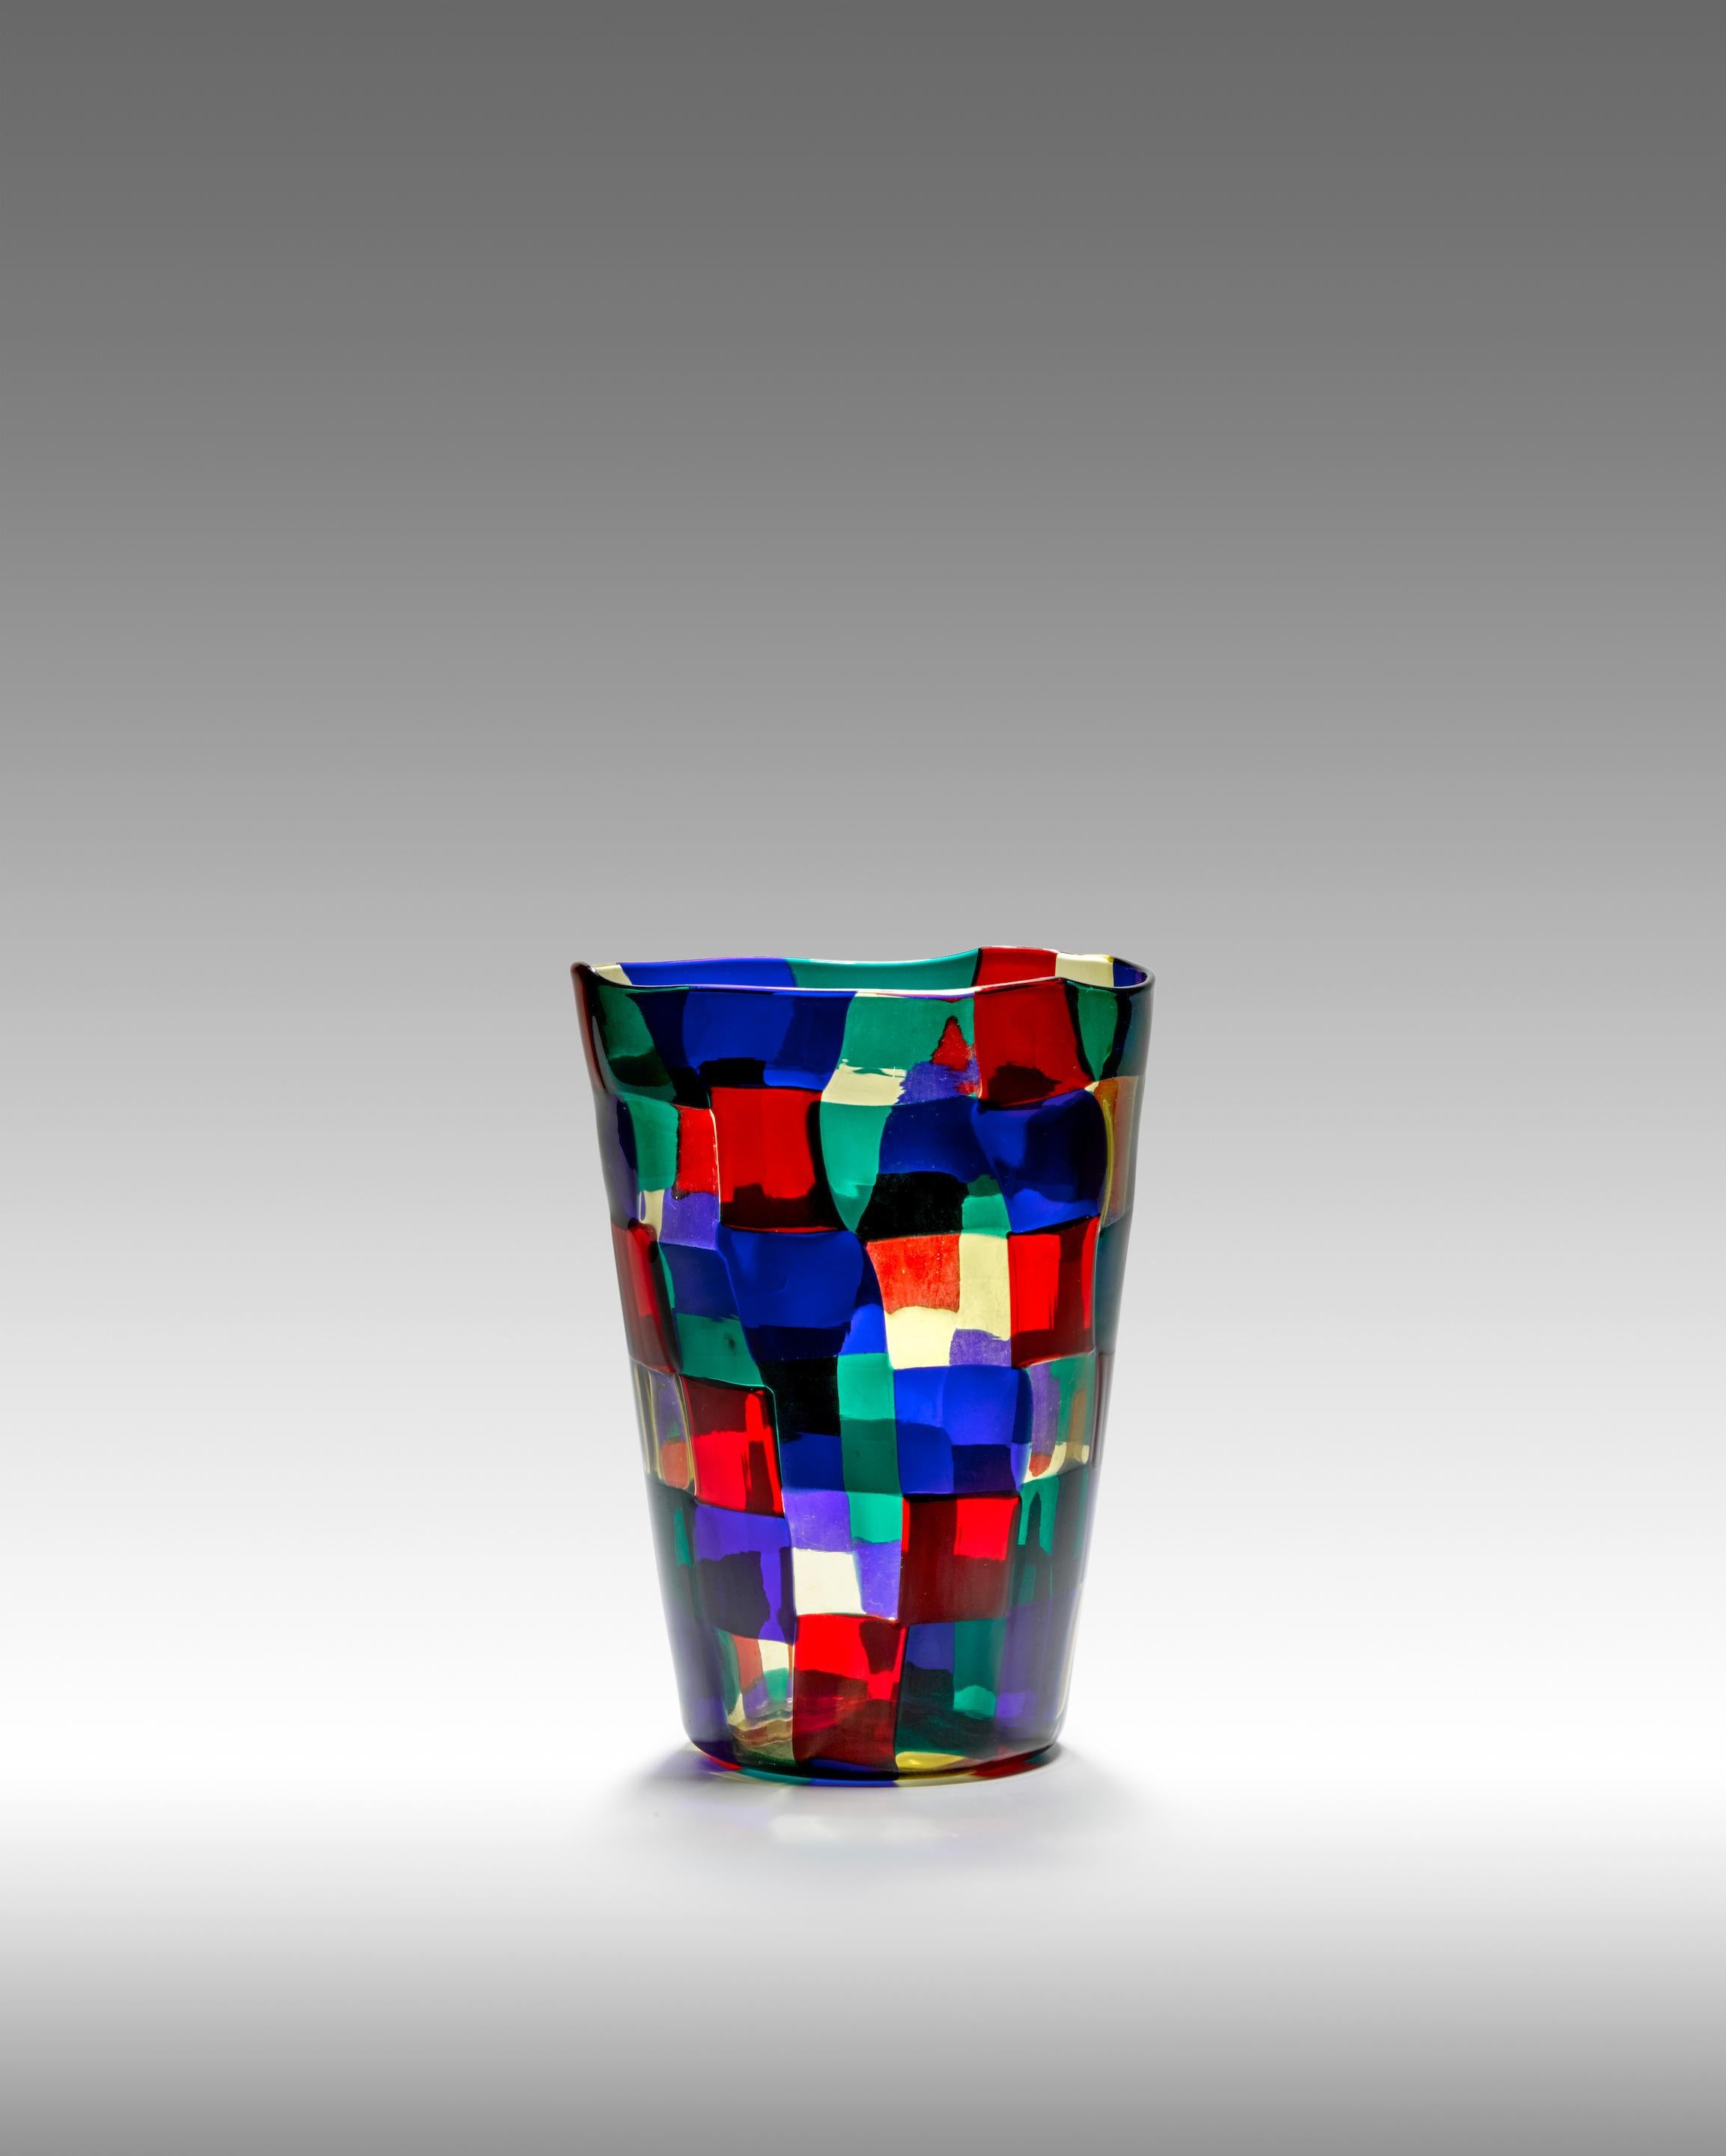 Model 1329 in the 'Paris' colorway of red, blue, green, and hay yellow glass. One of Bianconi's major contributions to the art of glassmaking, the Pezzato series premiered at the 1950 Venice Biennale where it won top honors in its area. The extreme